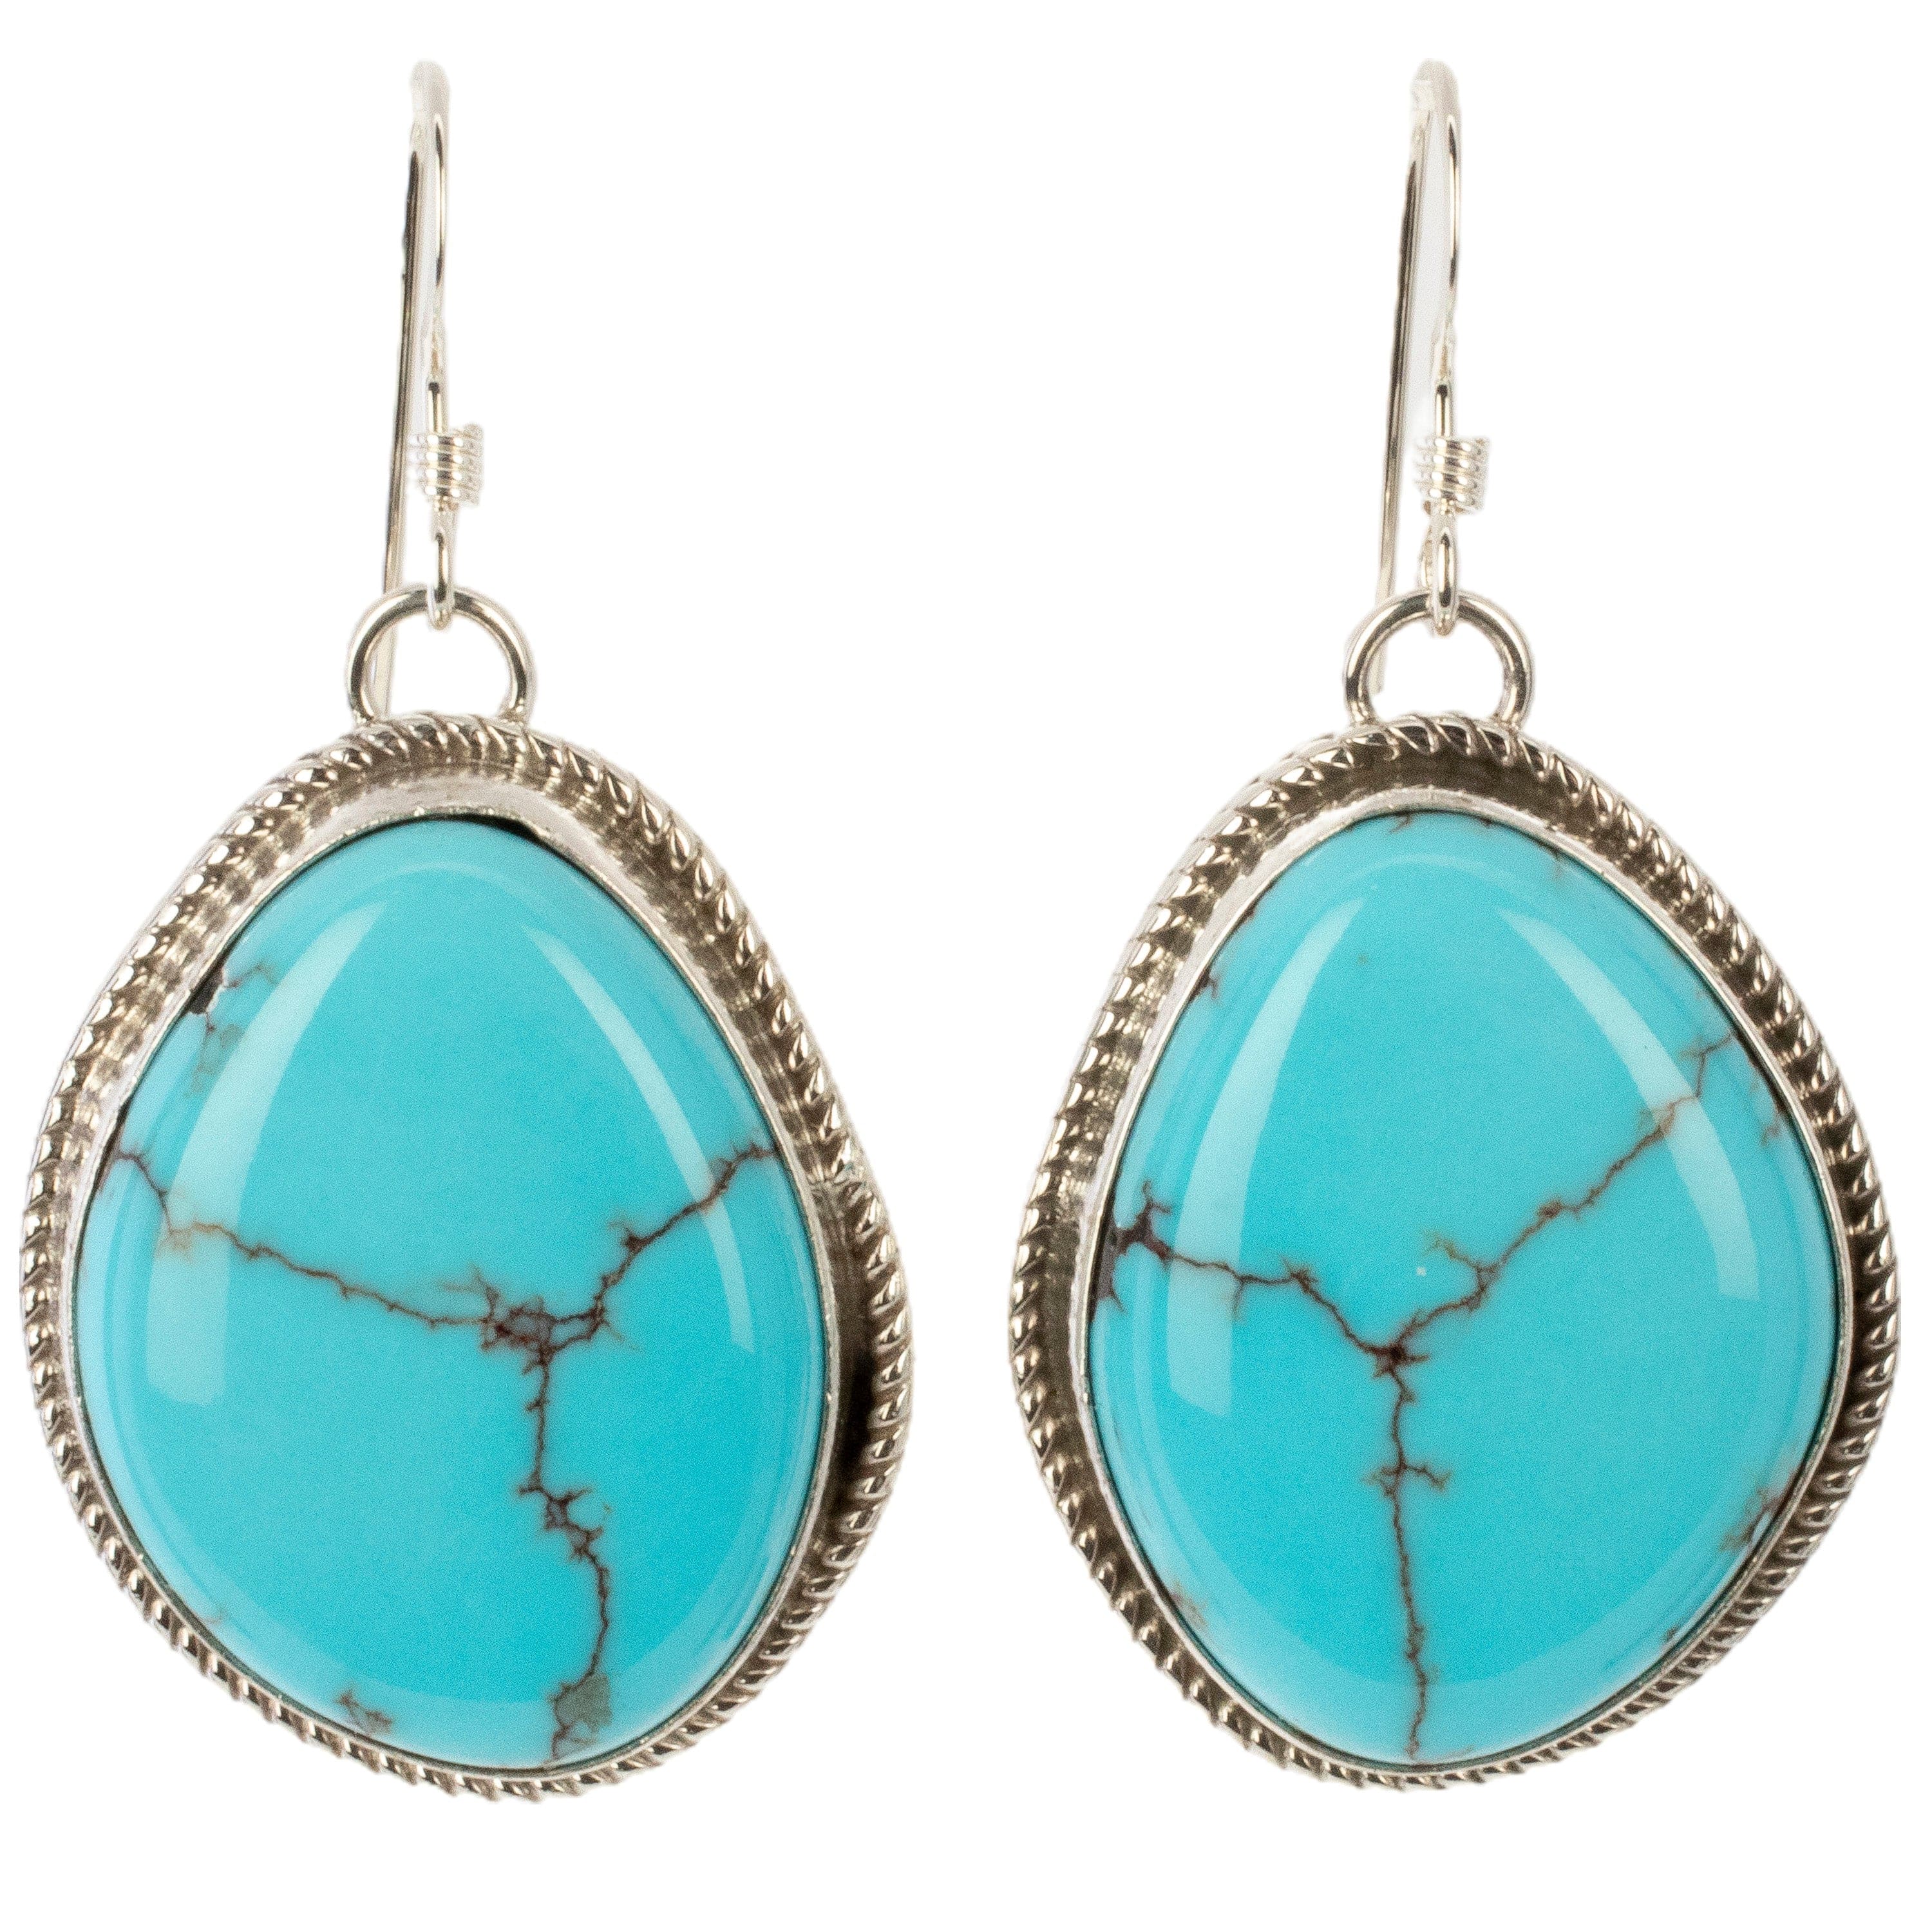 Kalifano Native American Jewelry Kingman Turquoise USA Native American Made 925 Sterling Silver Dangly Earrings with French Hook NAE600.015